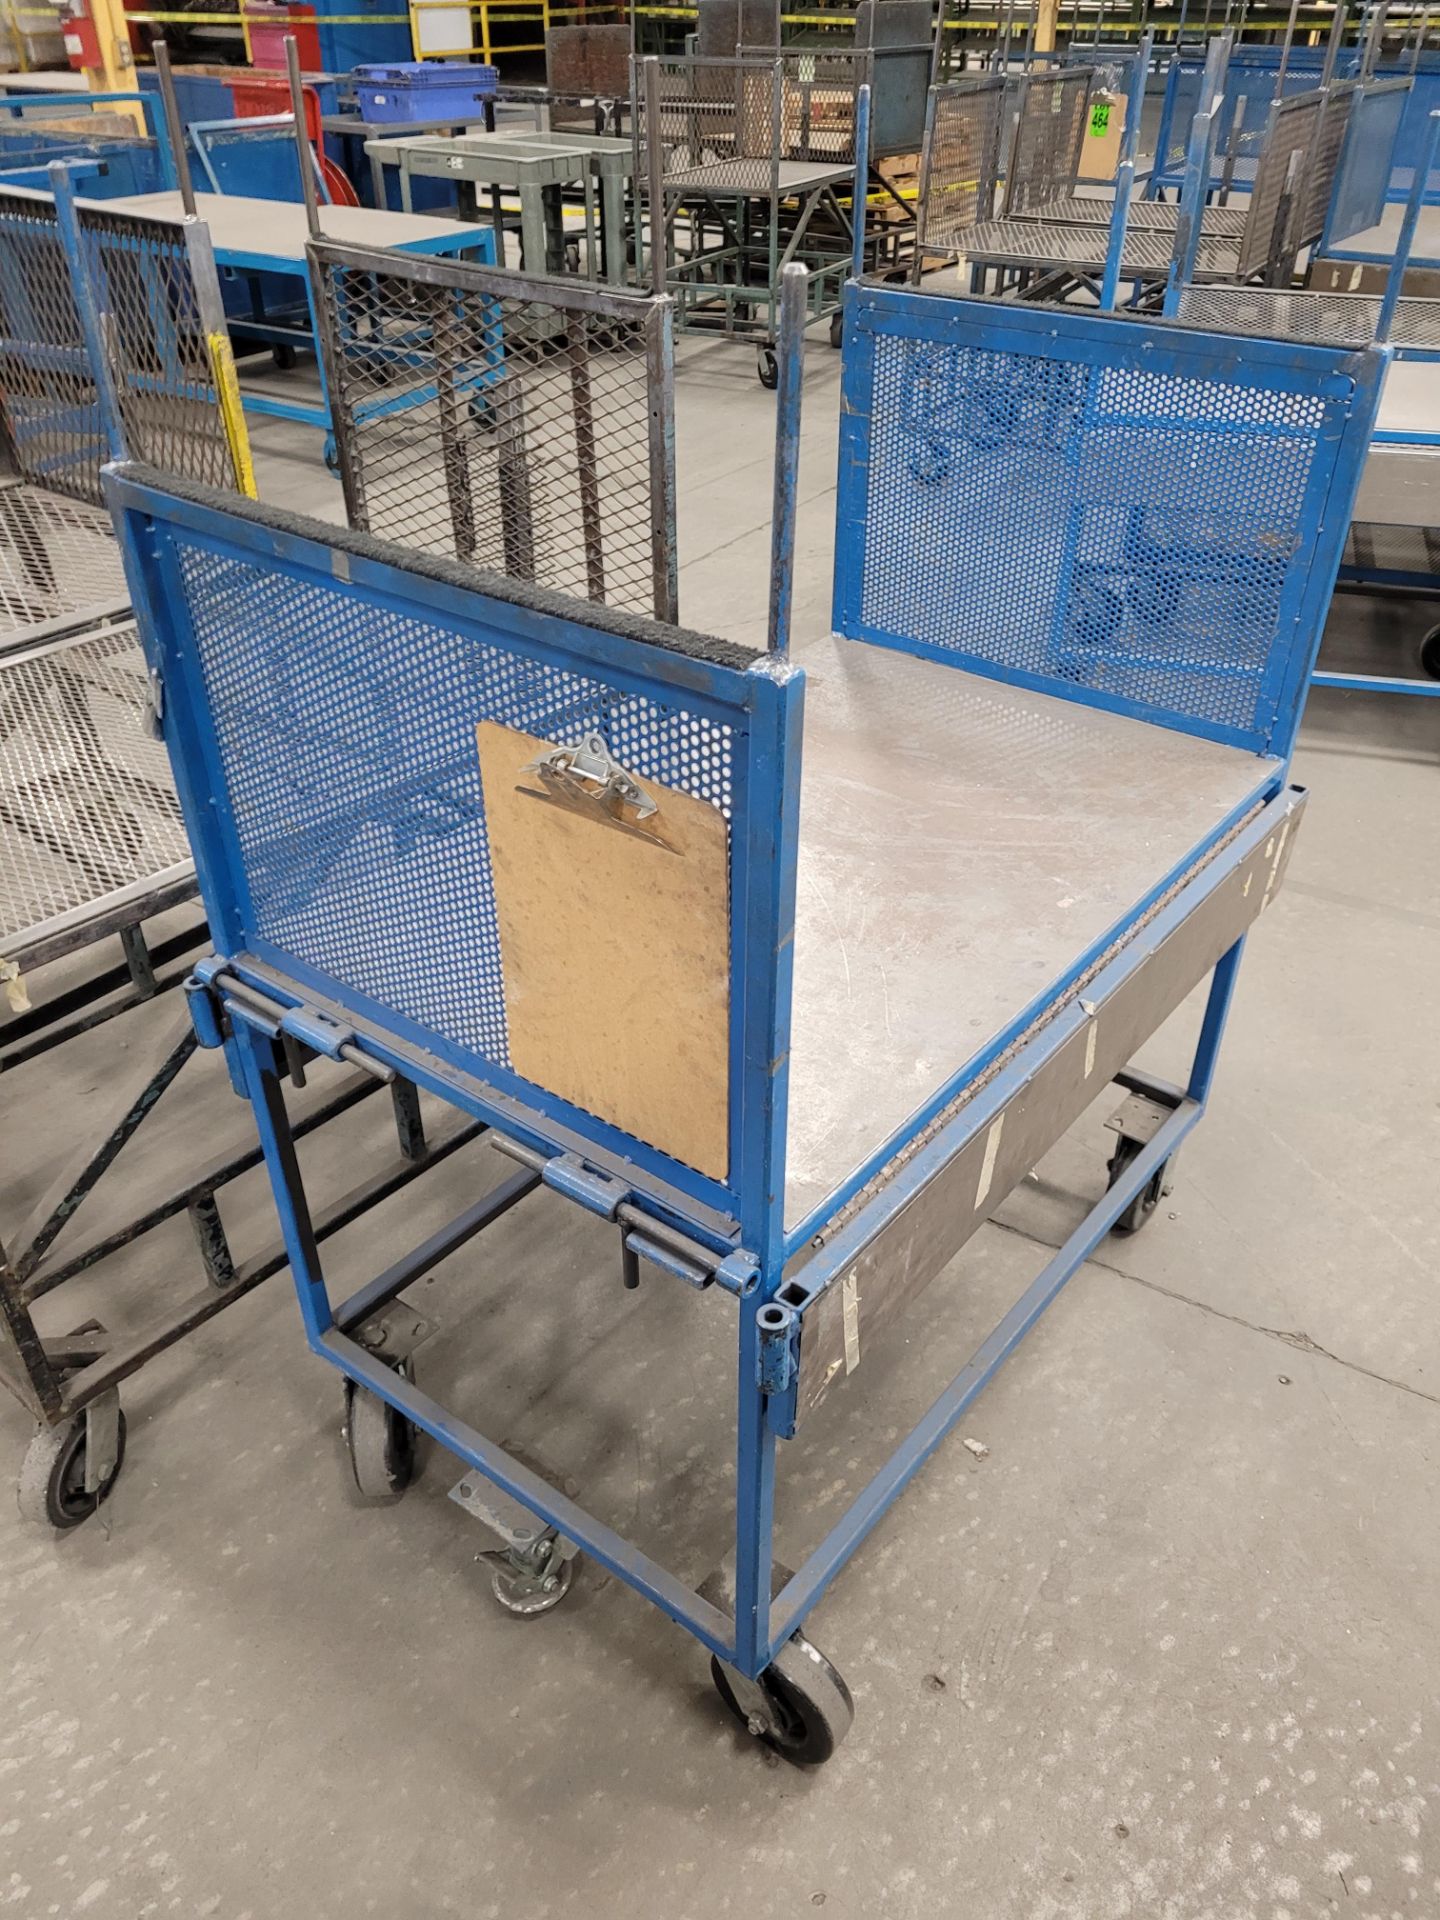 Lot of (3) steel-lattice carts w/handles, casters, wheel lock, (1) w/ expandable sides and floor loc - Image 4 of 4